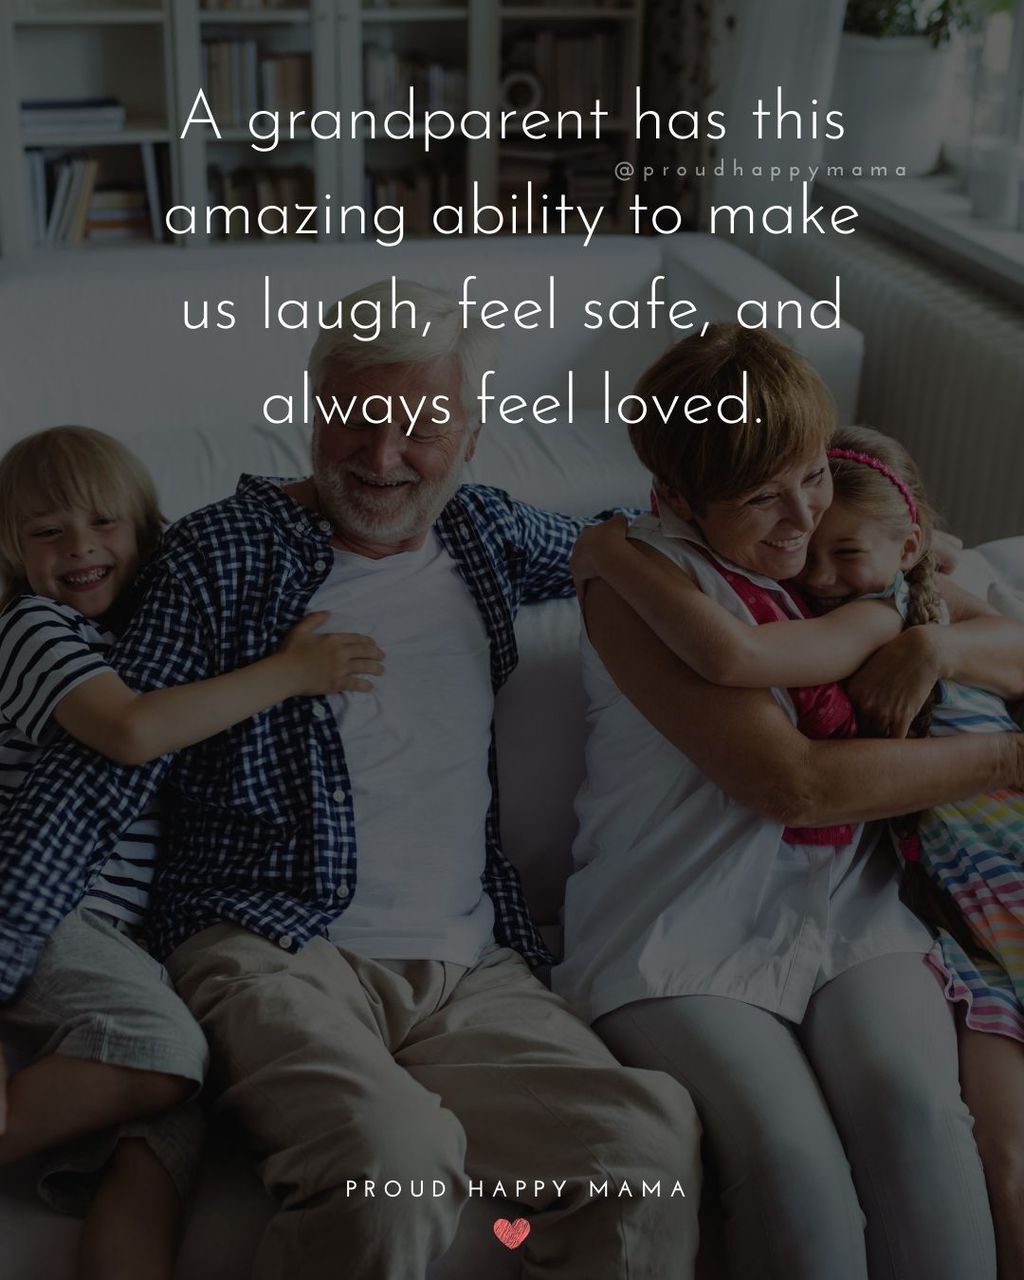 Grandson Quotes And Sayings | A grandparent has this amazing ability to make us laugh, feel safe, and always feel loved.